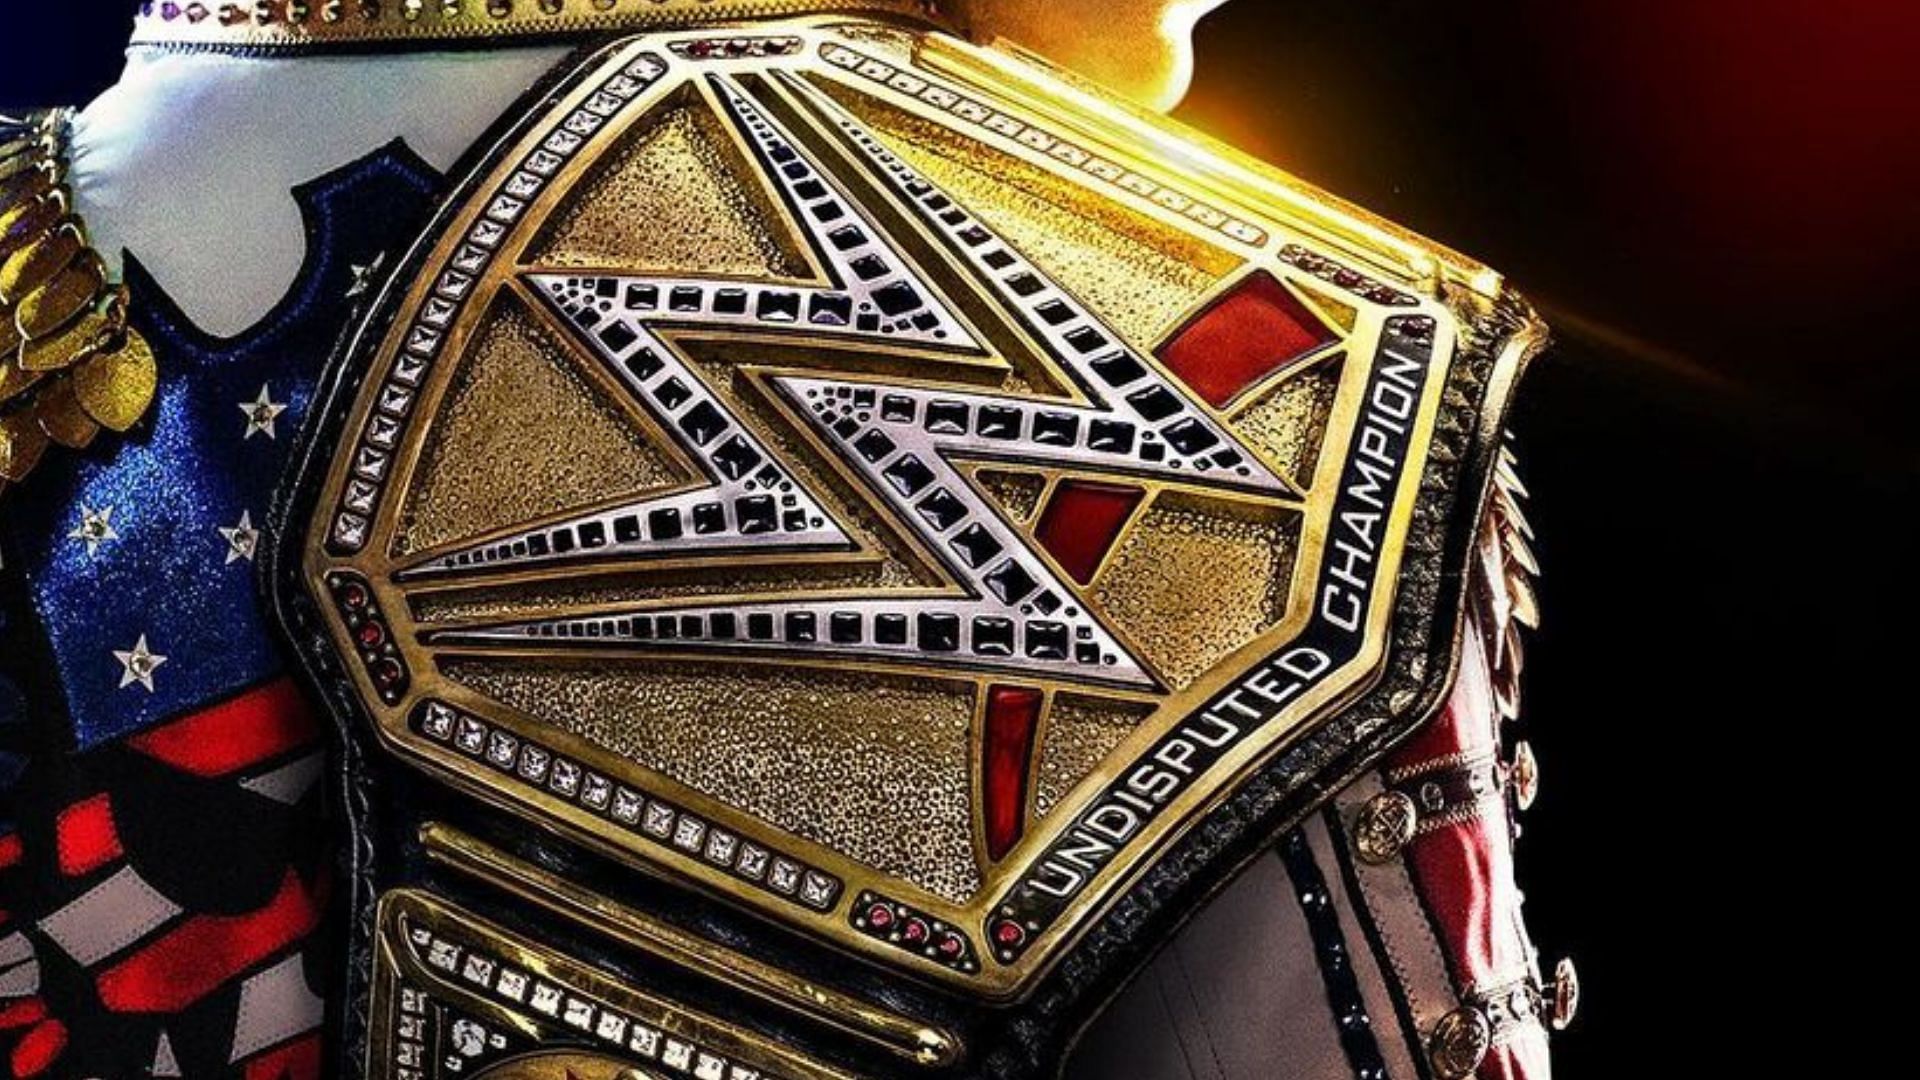 The Undisputed WWE Championship (Credit: WWE)